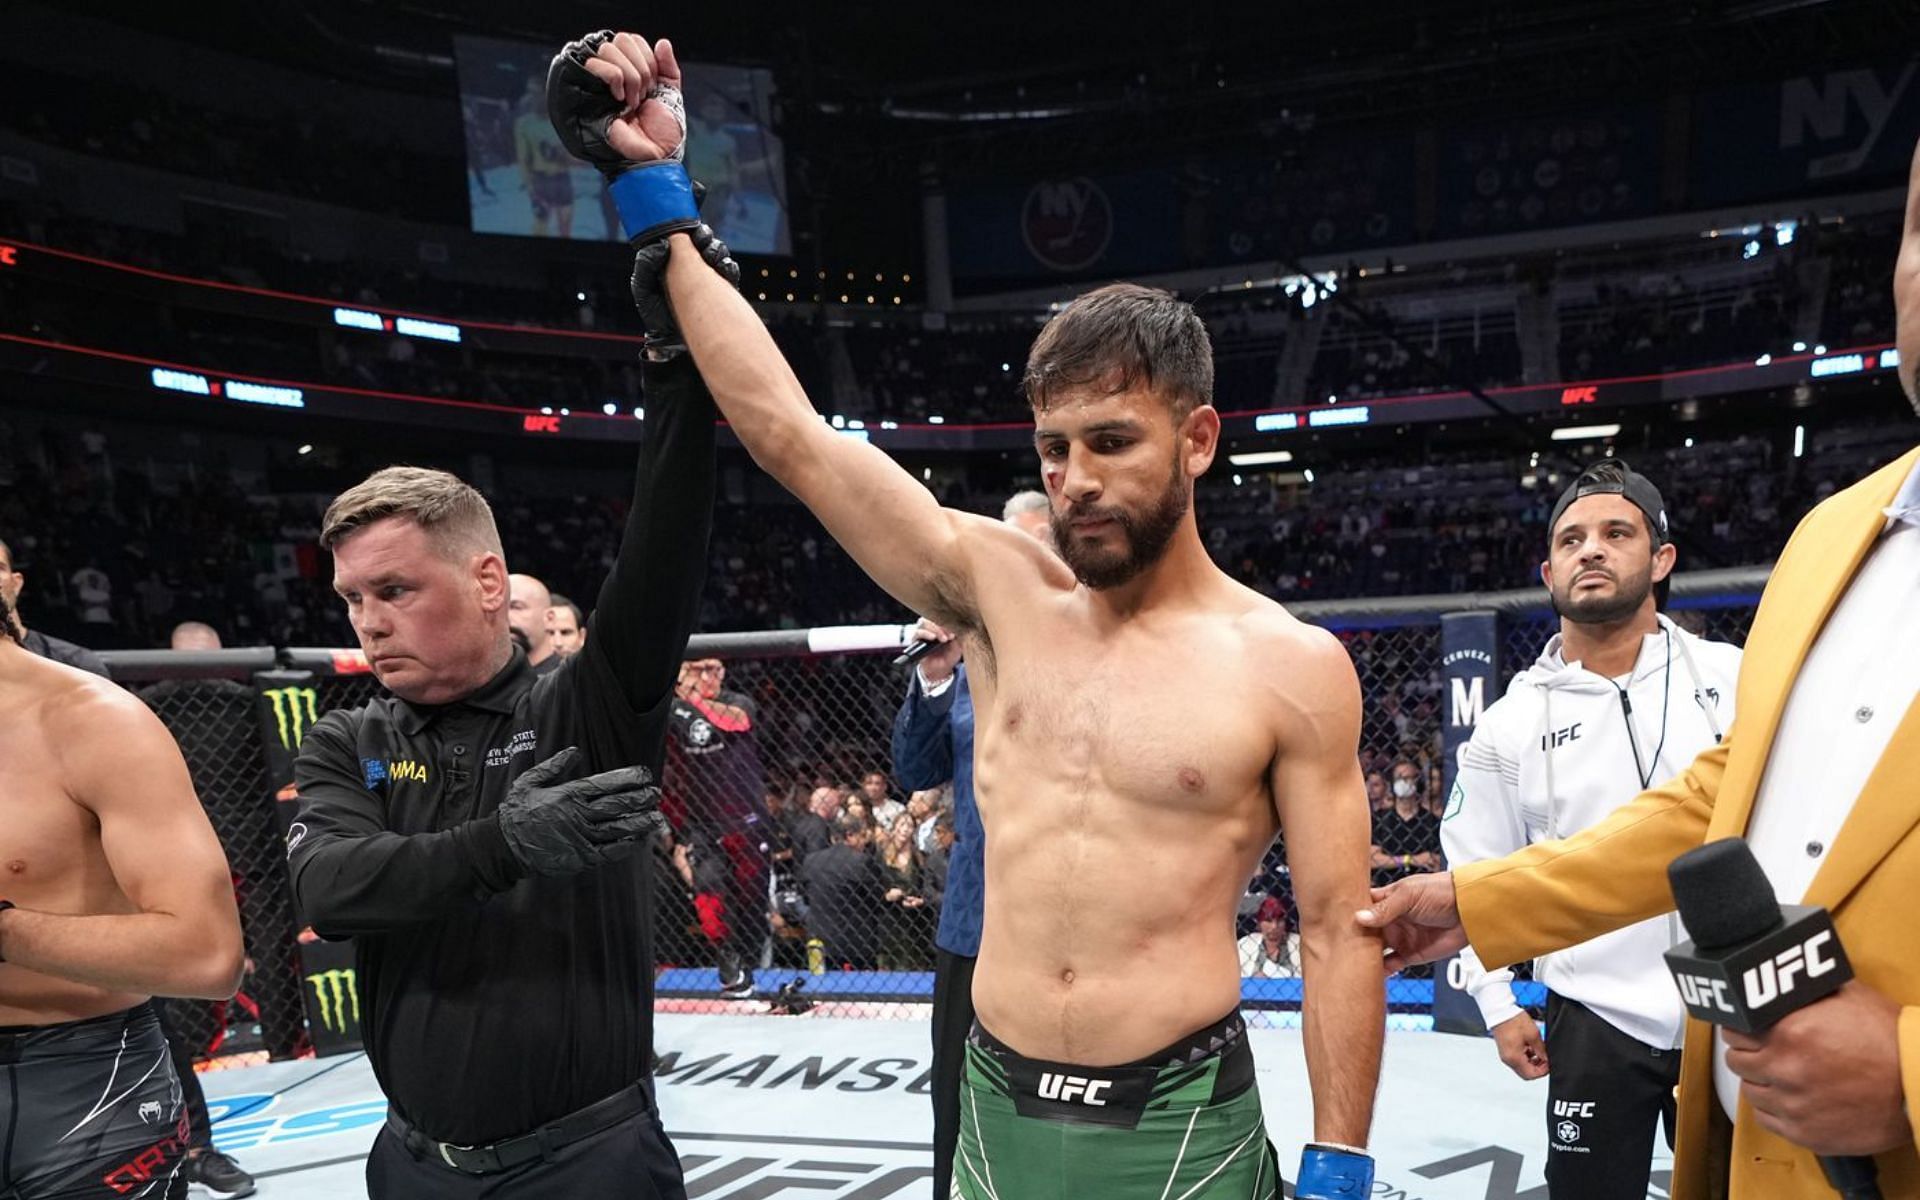 After his anticlimactic win over Brian Ortega, who should be next for Yair Rodriguez?